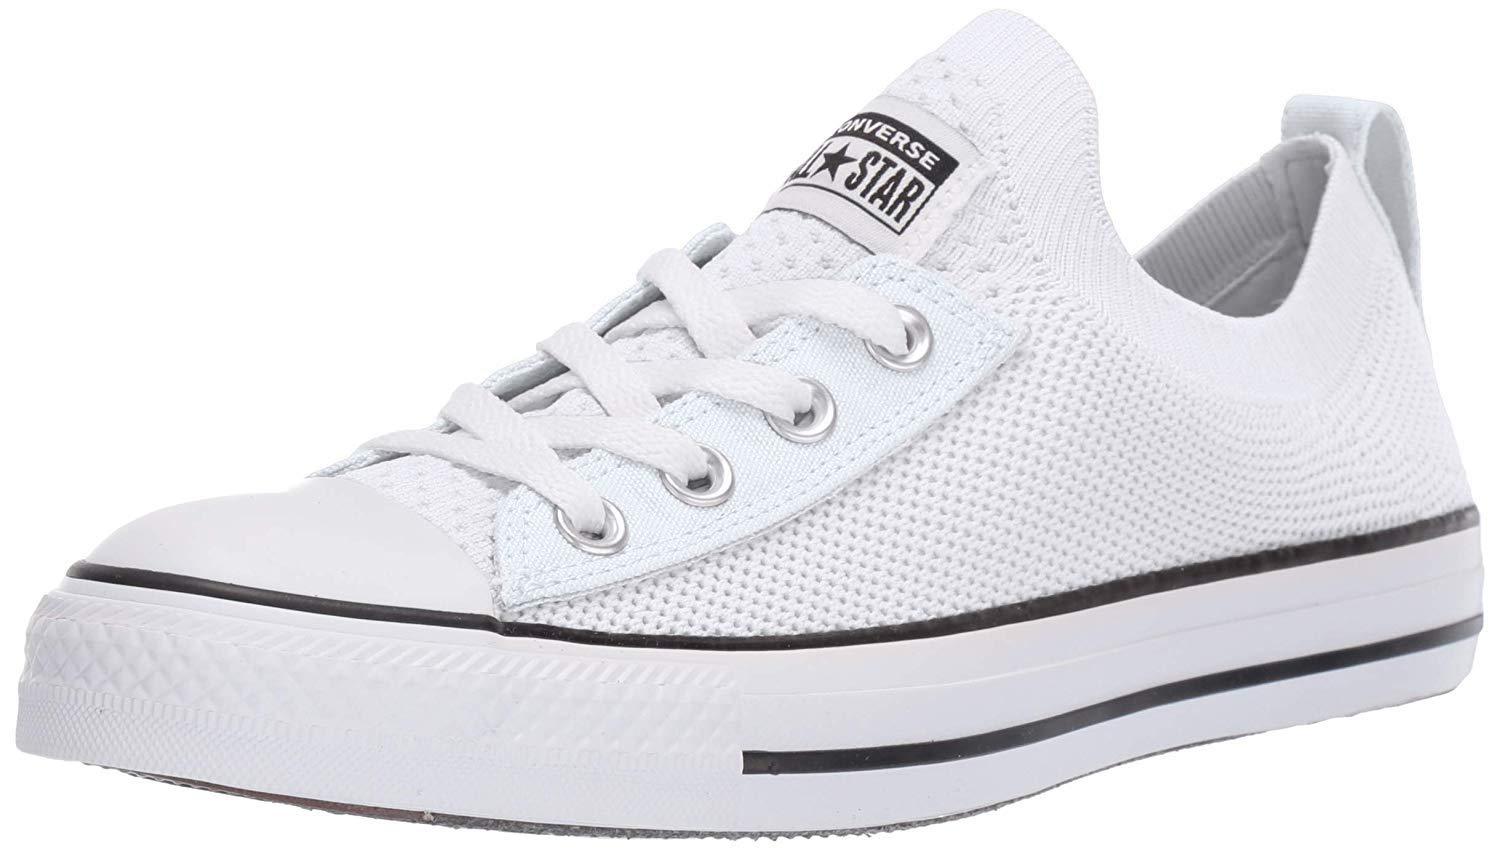 Converse Chuck Taylor Shoreline Knit Slip On Sneakers in White | Lyst